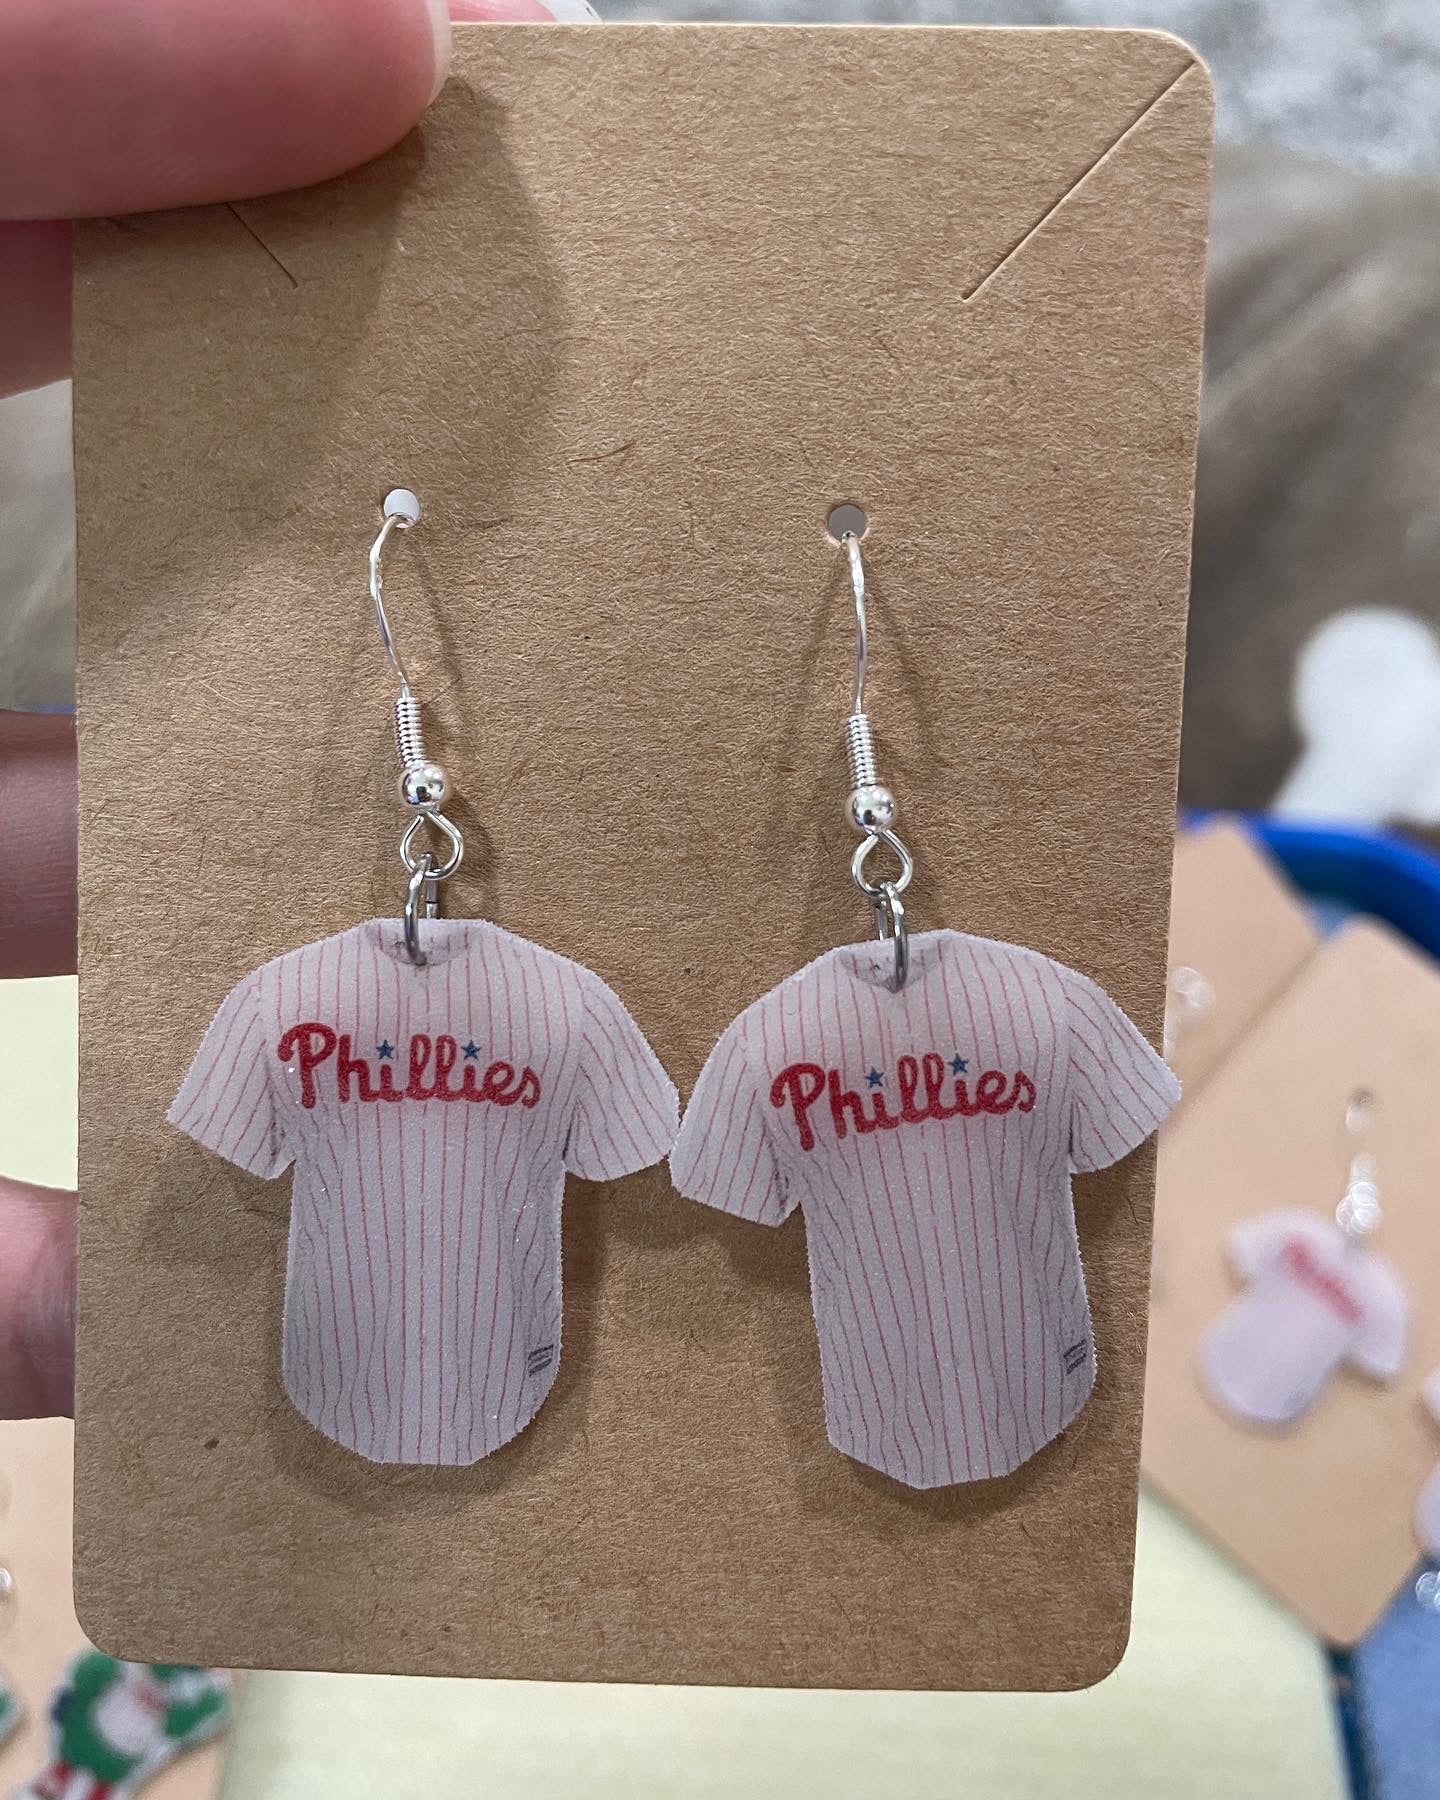 Phillies Jersey and Phanatic Earrings